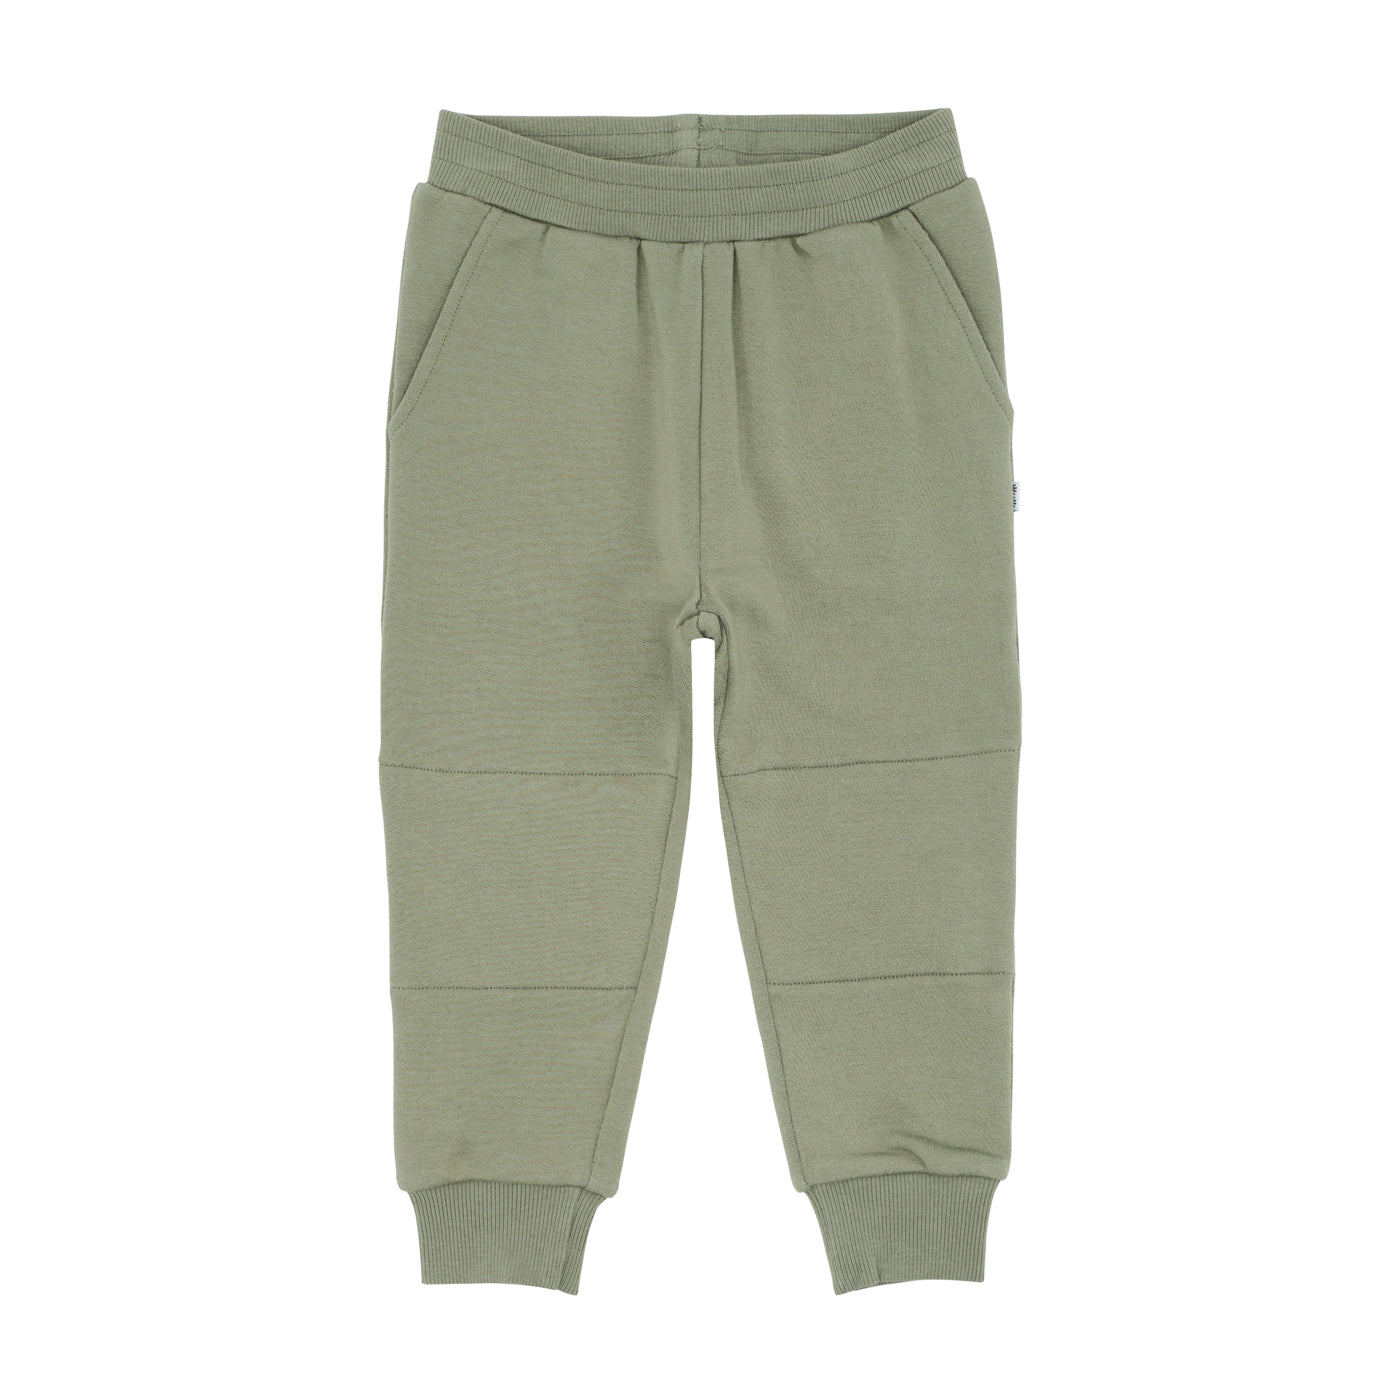 Flat lay image of Moss joggers